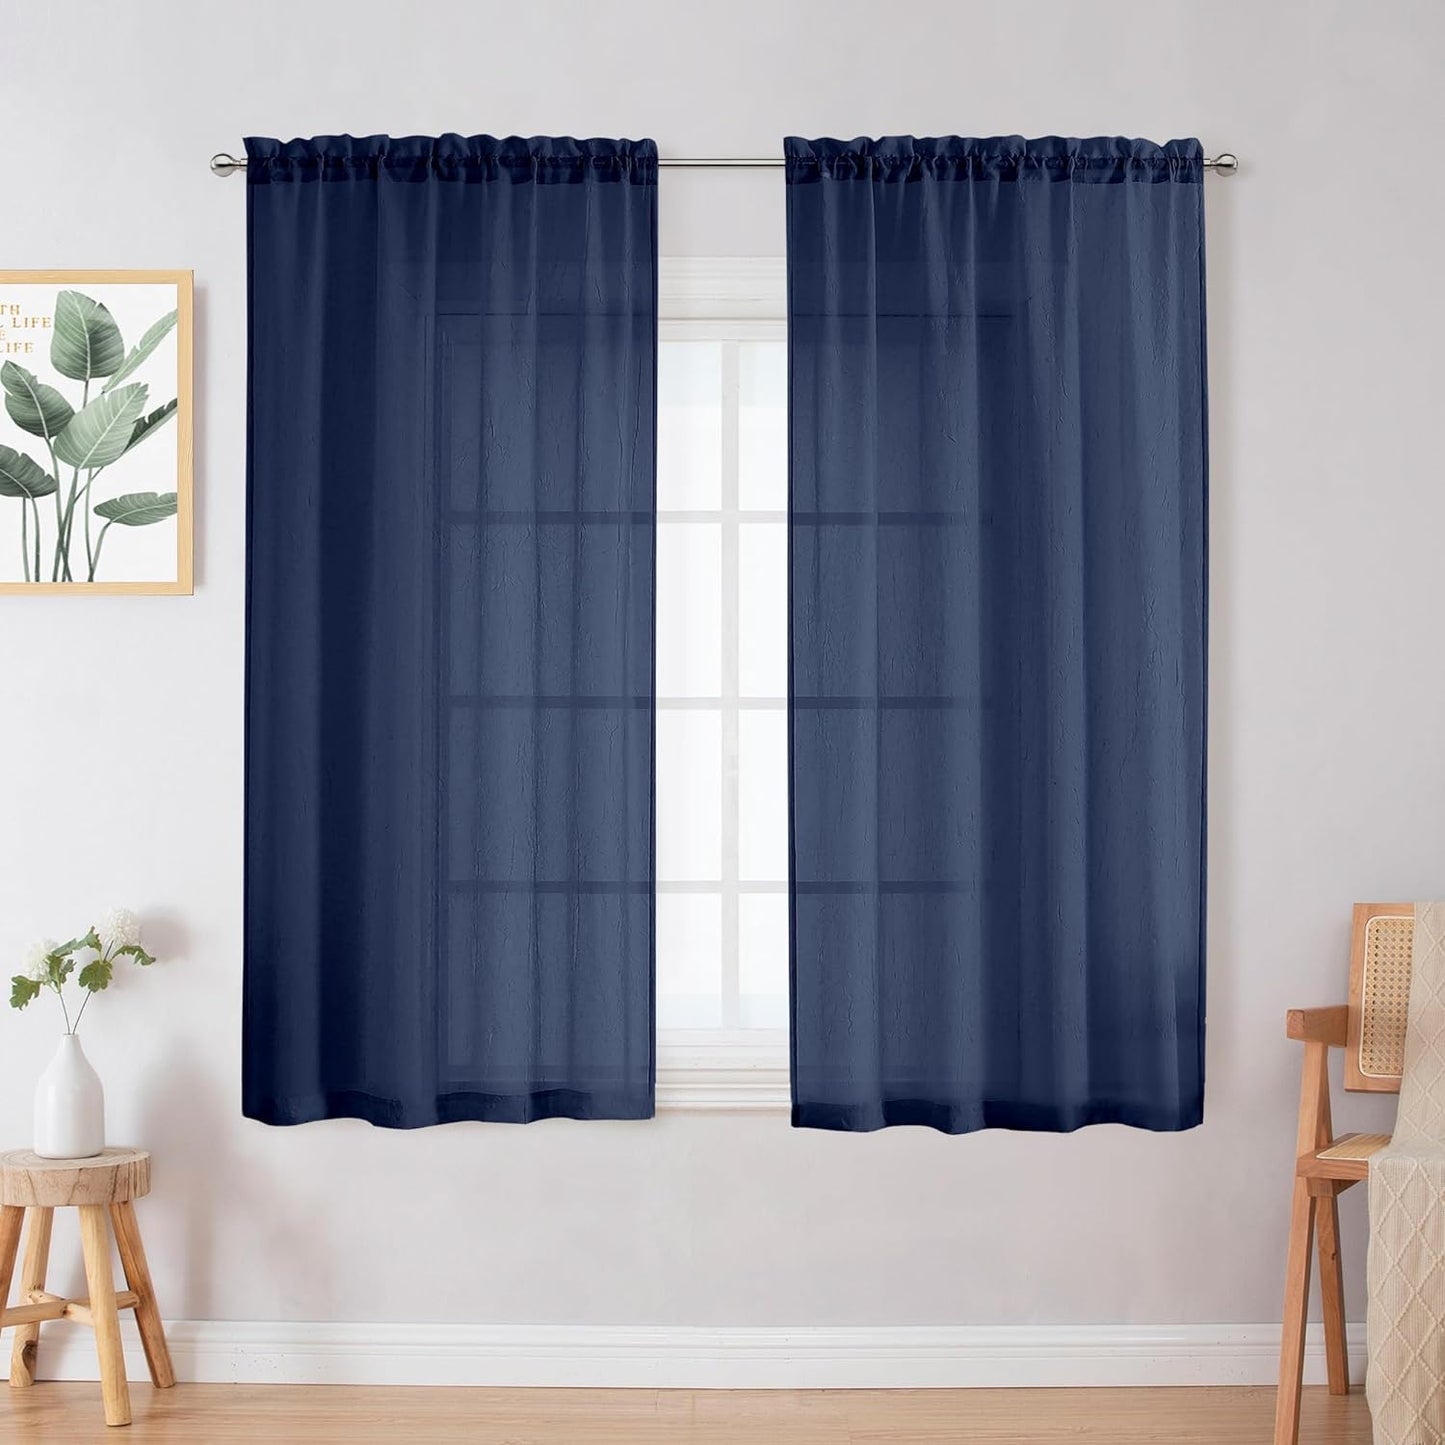 Chyhomenyc Crushed White Sheer Valances for Window 14 Inch Length 2 PCS, Crinkle Voile Short Kitchen Curtains with Dual Rod Pockets，Gauzy Bedroom Curtain Valance，Each 42Wx14L Inches  Chyhomenyc Navy Blue 28 W X 45 L 